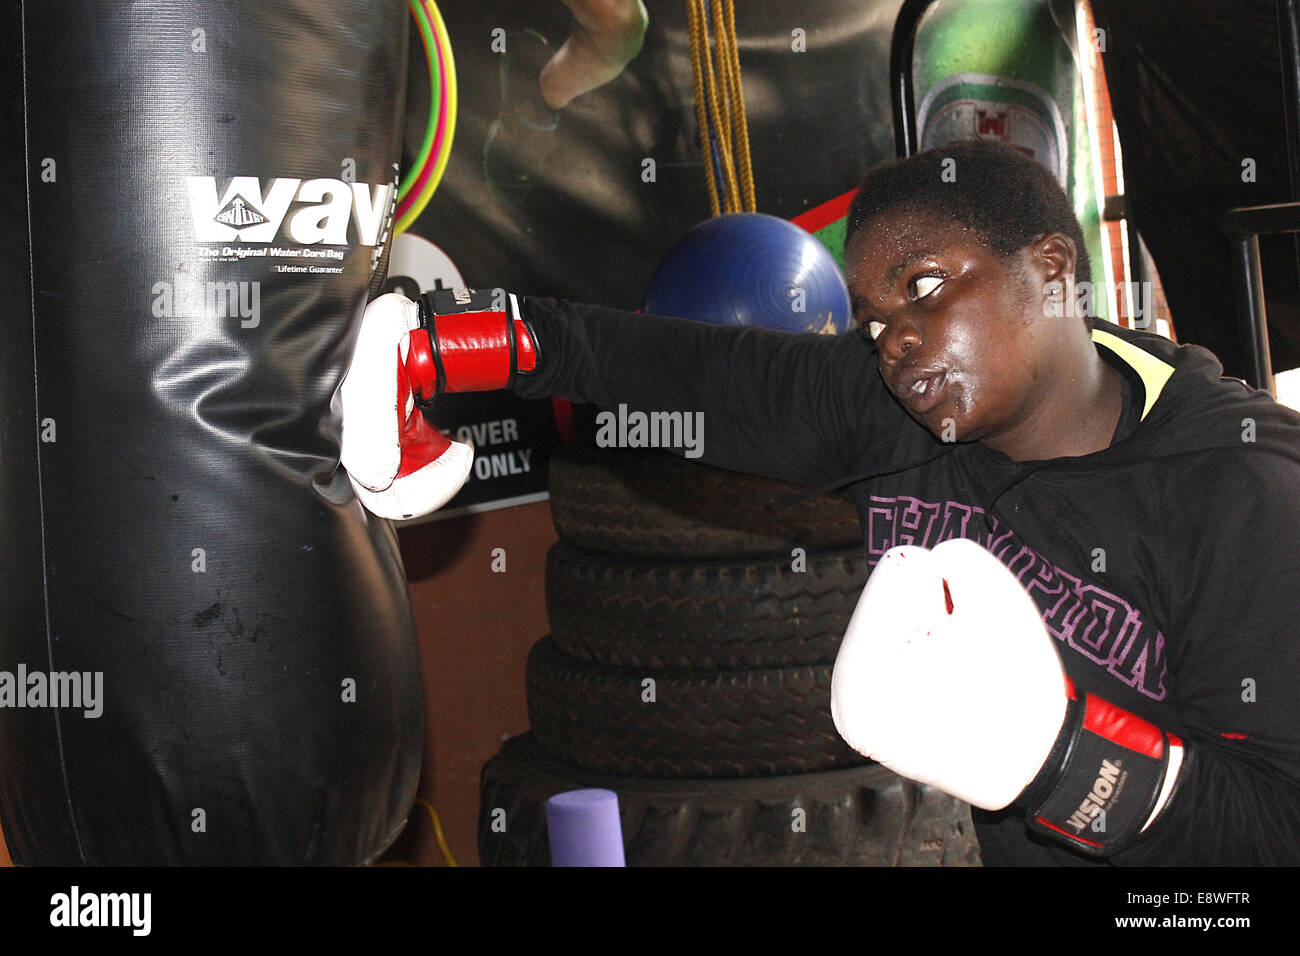 Kampala, Uganda. 15th October, 2014. A Ugandan woman boxer loading punching power in preparation for the World Championships due in South Korea on November 13-25. Despite luck of income, most boxers carry on traning with the hope of gaining fame through the sport. Credit:  Samson Opus/Alamy Live News Stock Photo